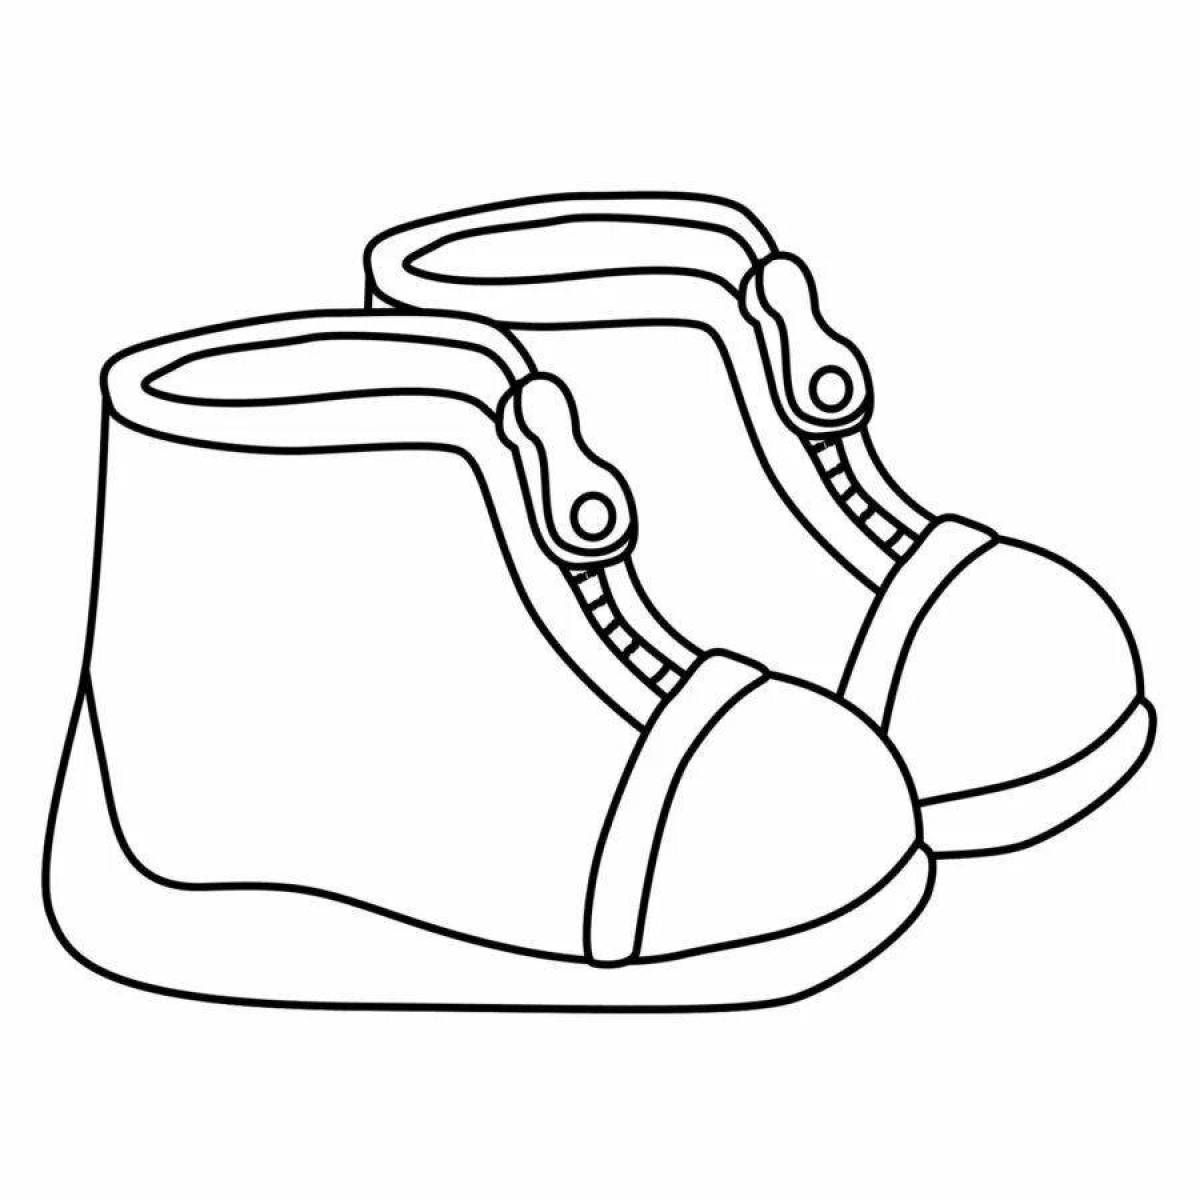 Gorgeous shoes coloring page for children 4-5 years old